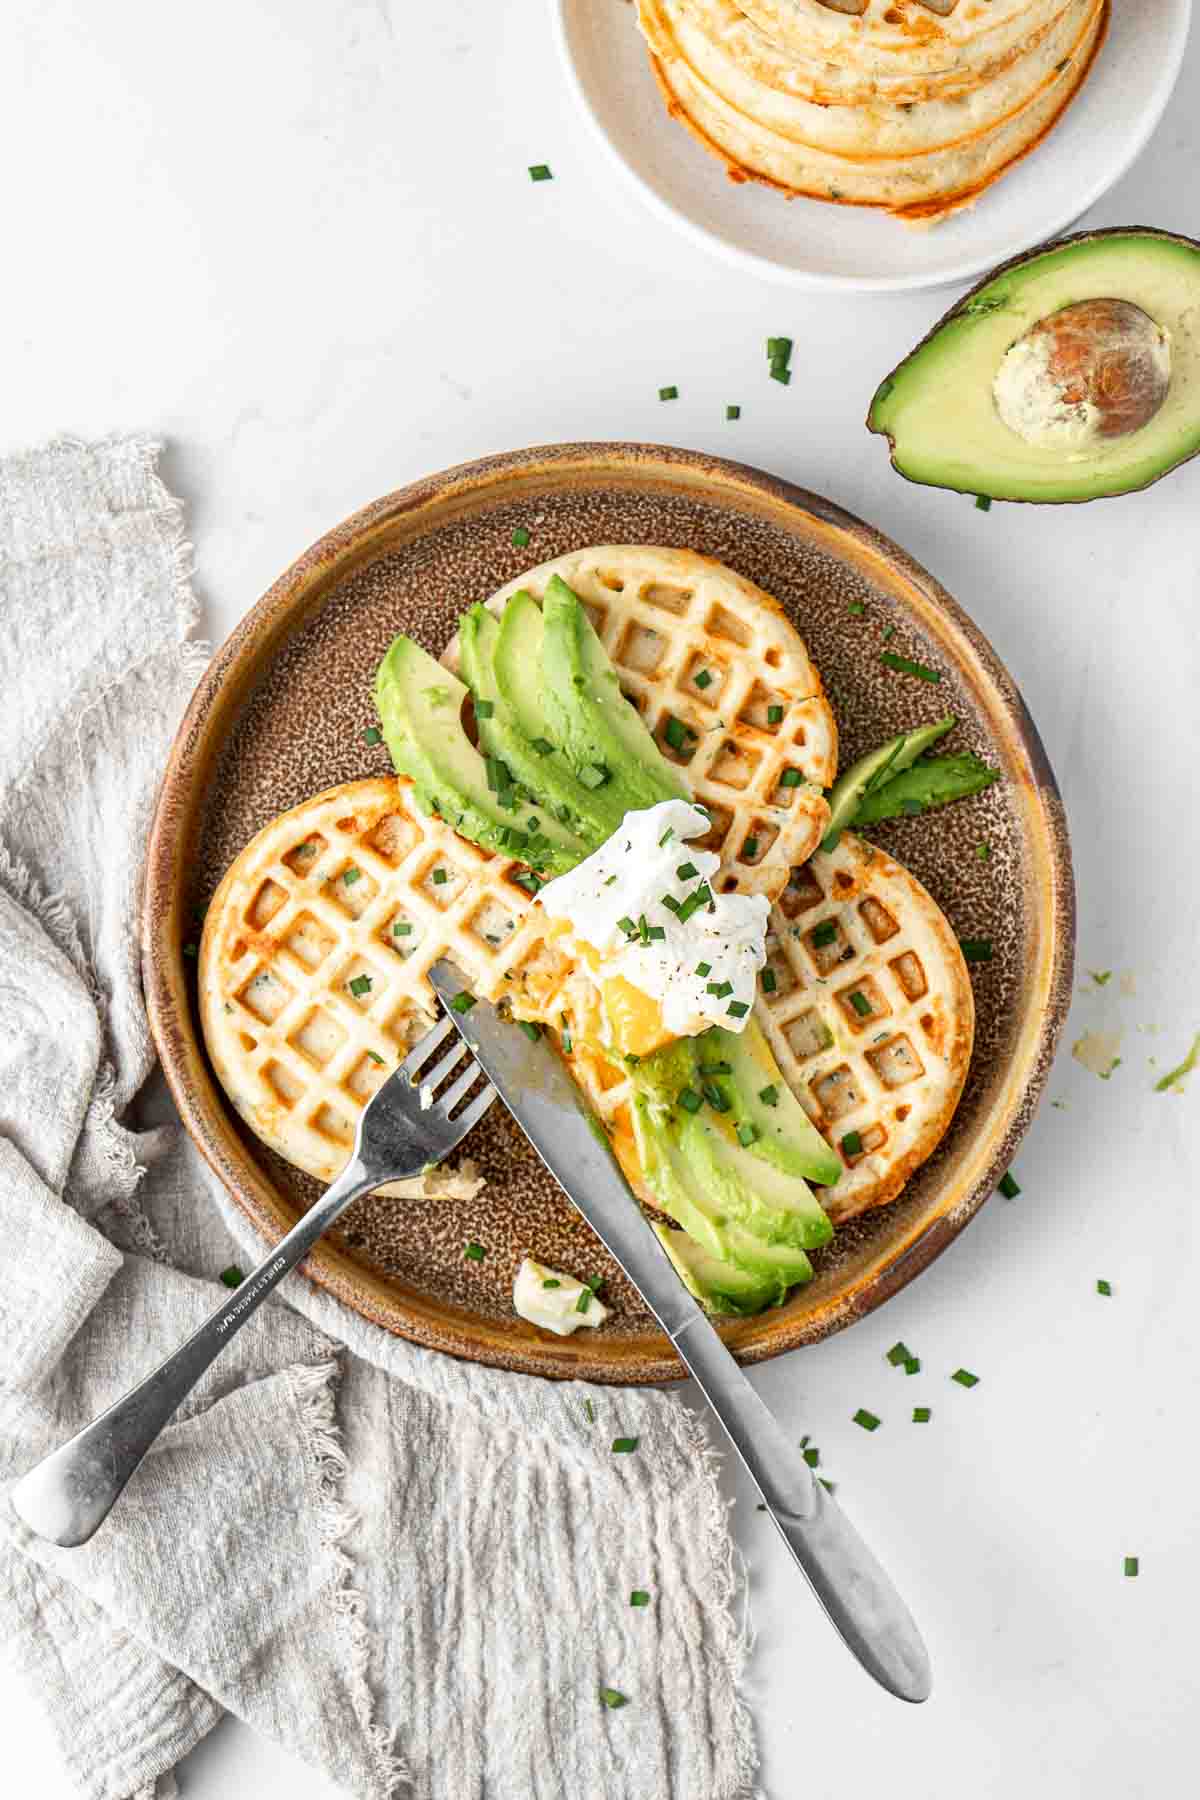 Poached egg and avocado on savoury cheese and chive waffles with fresh chives.